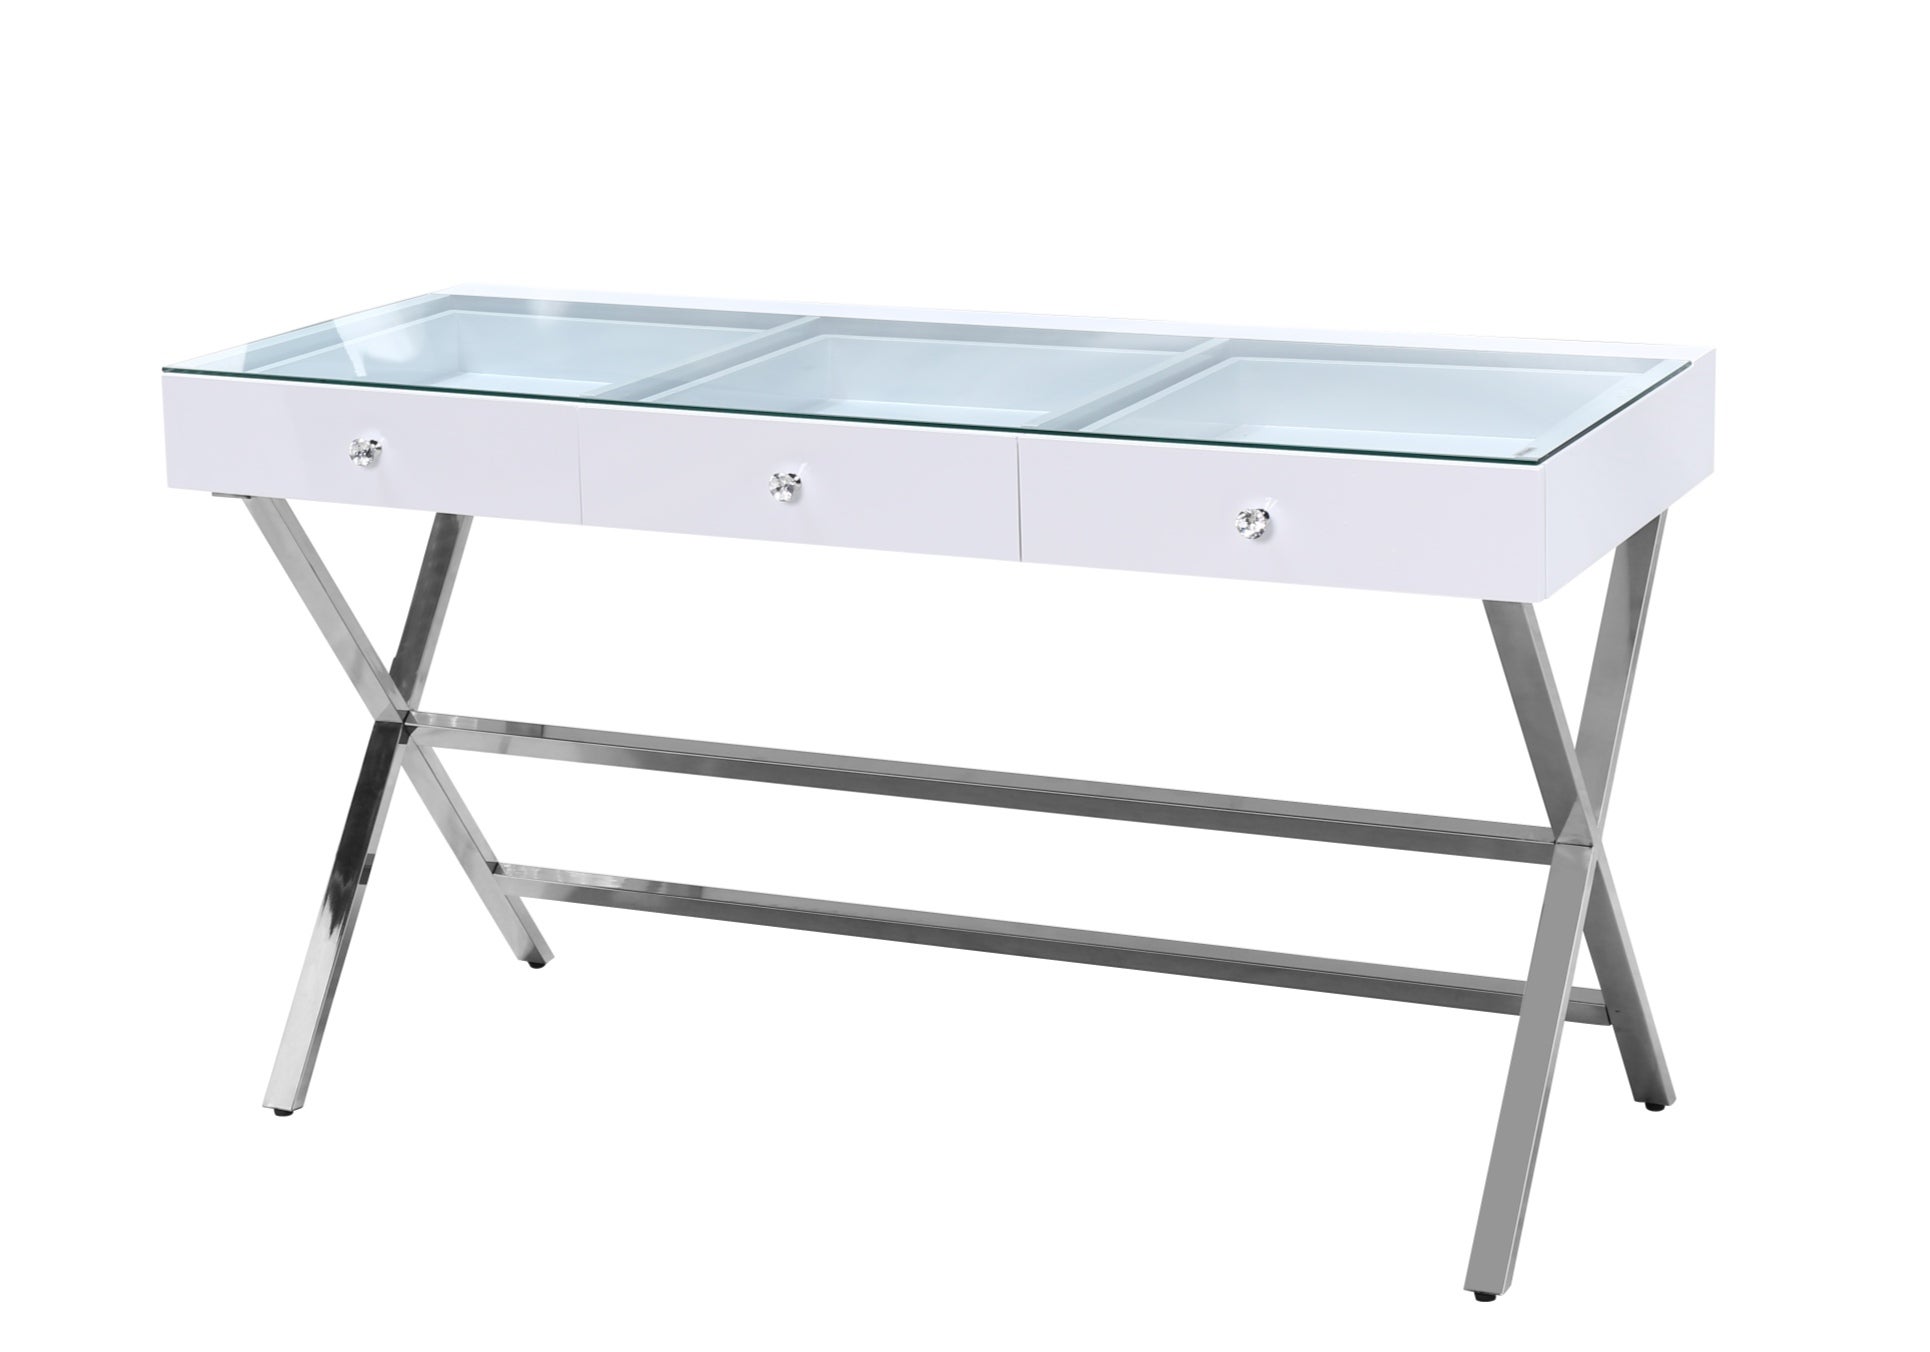 3 Drawers Clear Glass Top Table - White